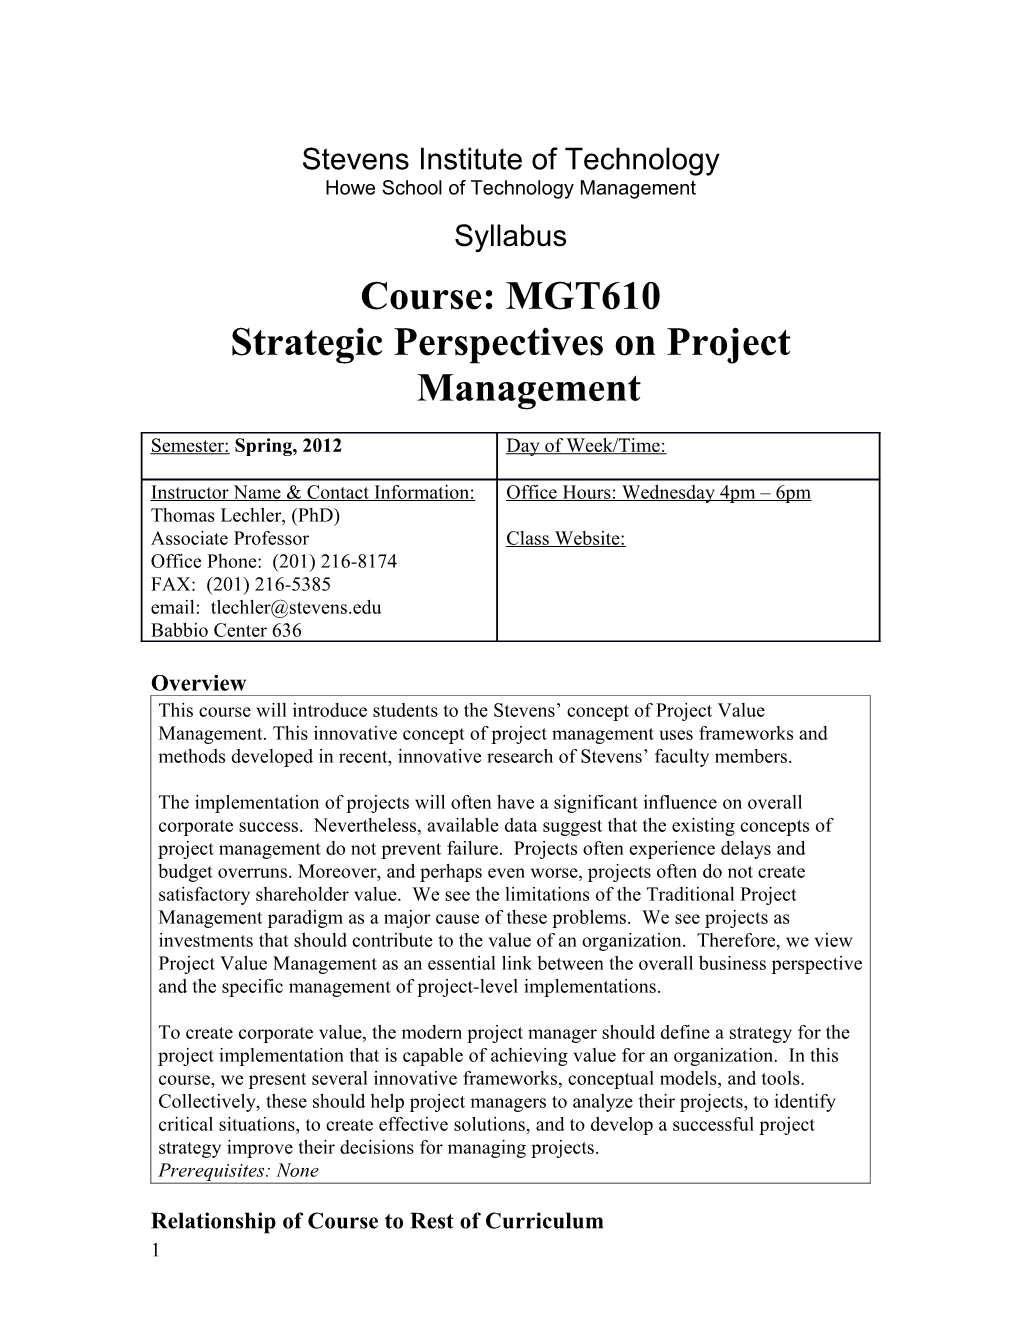 Strategic Perspectives on Project Management